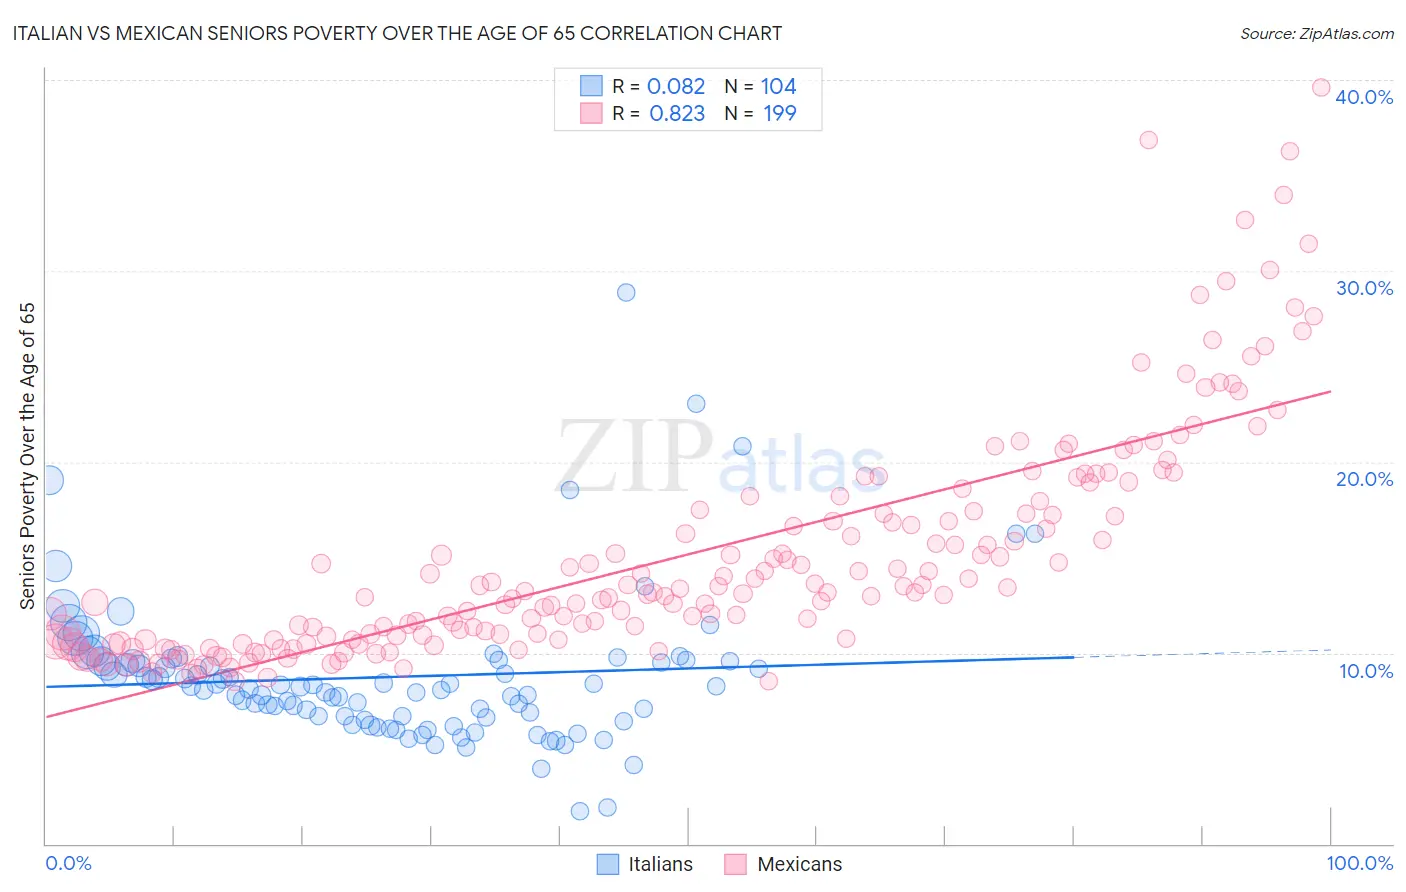 Italian vs Mexican Seniors Poverty Over the Age of 65